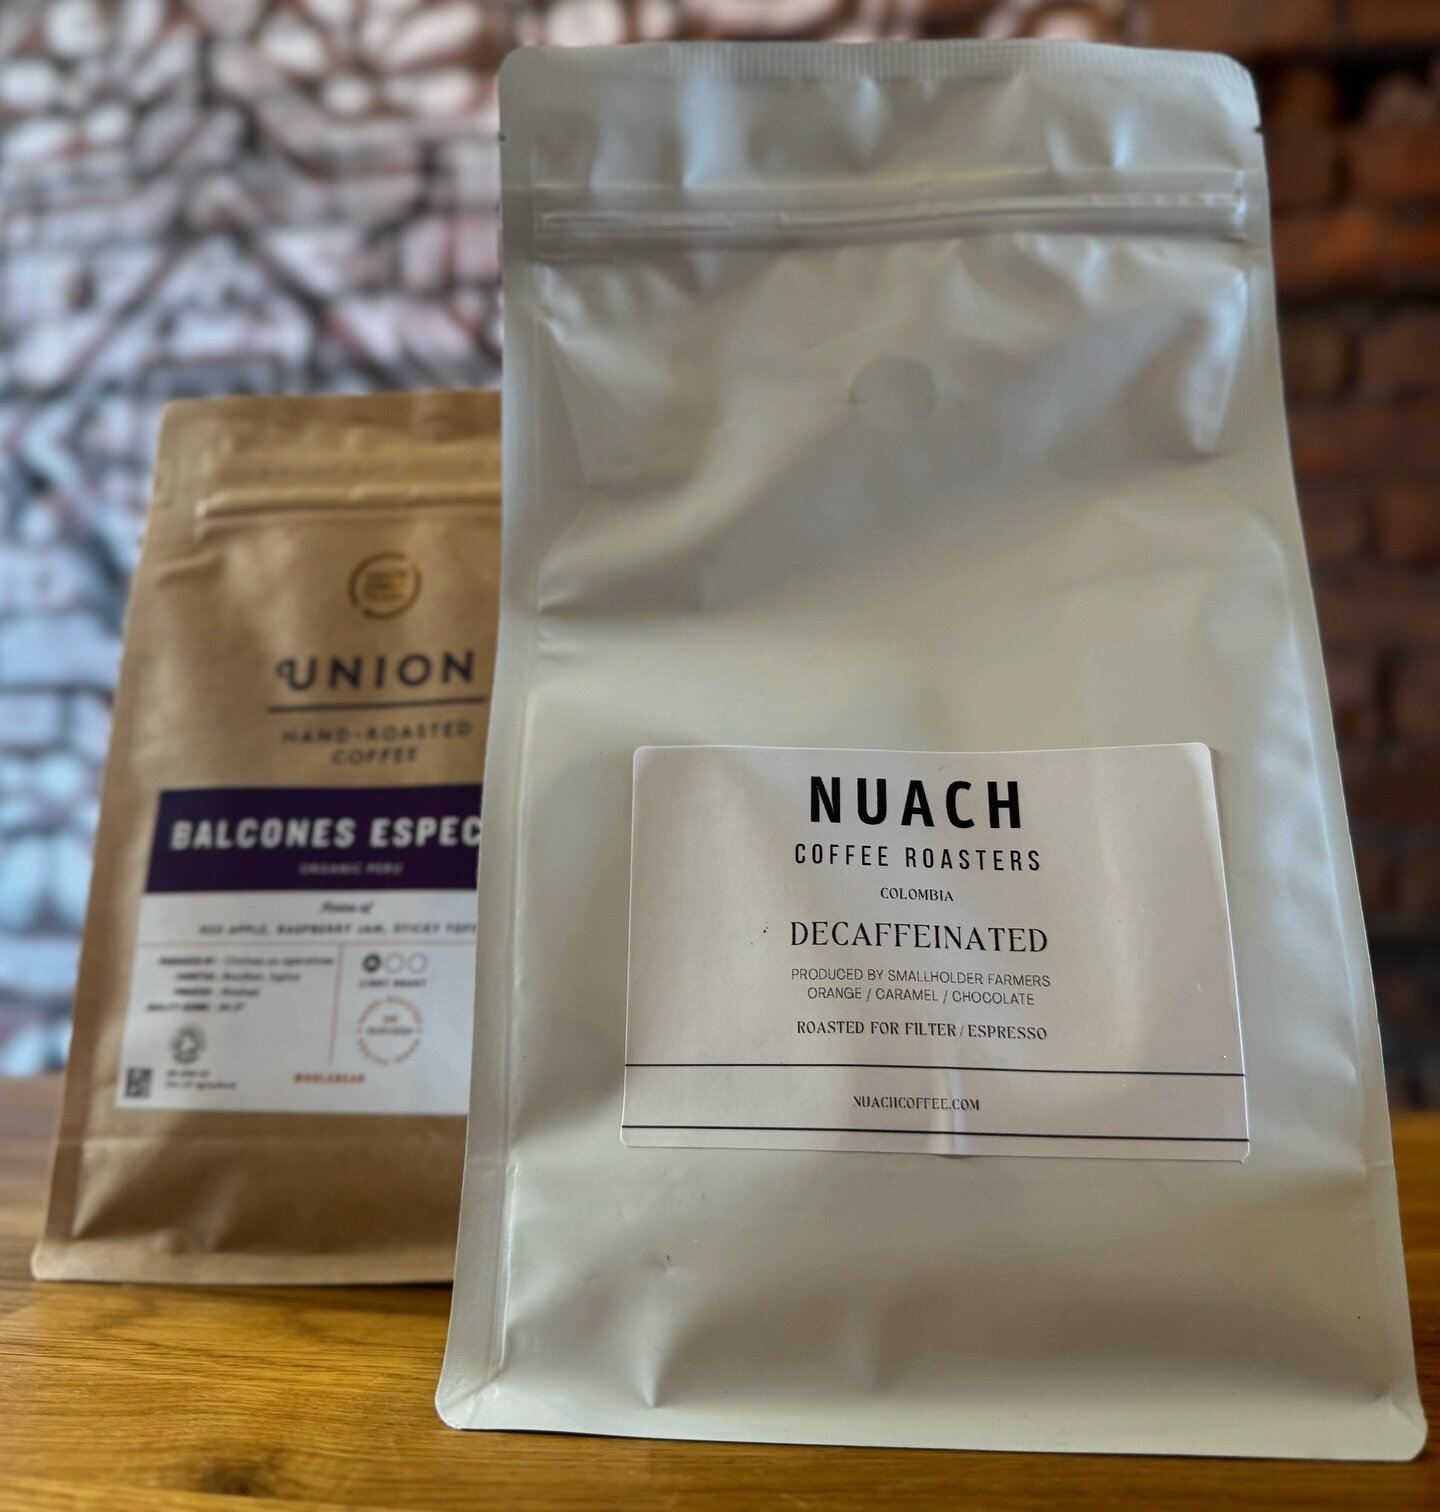 You can find some of Nuach&rsquo;s delicious Decaf espresso gracing our retail shelf. This coffee is from Colombia and has classic notes of orange, caramel, chocolate.

(And also some of Union&rsquo;s Balcones Especial 😋)

#coffee #coffeeshop #nomad